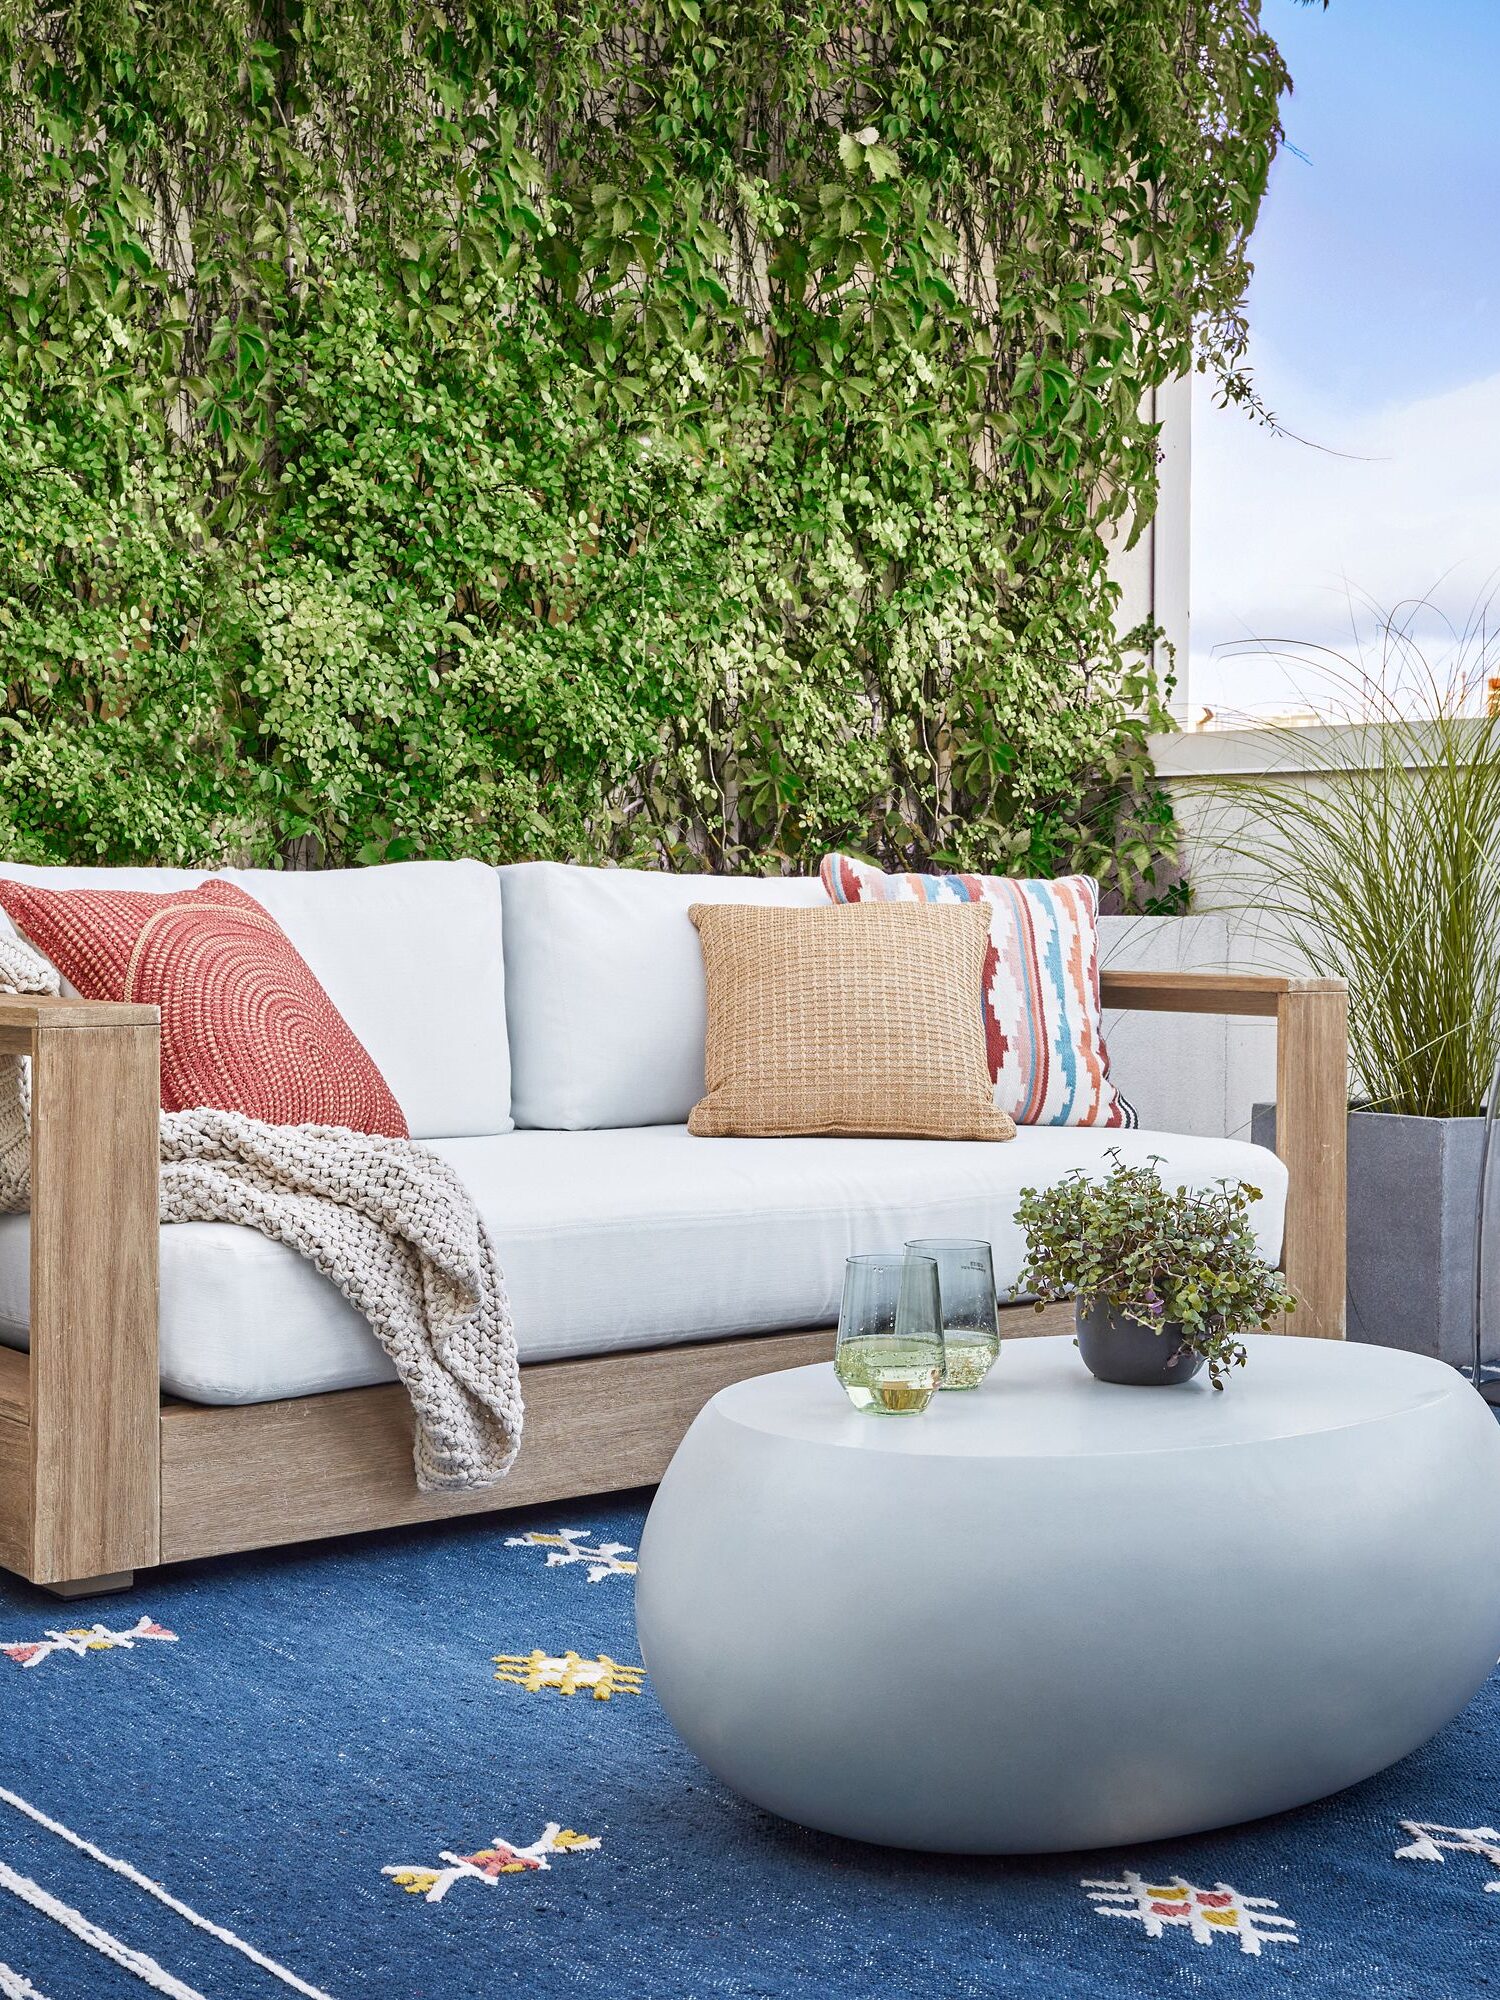 An outdoor sofa with modern round coffee table and outdoor rug